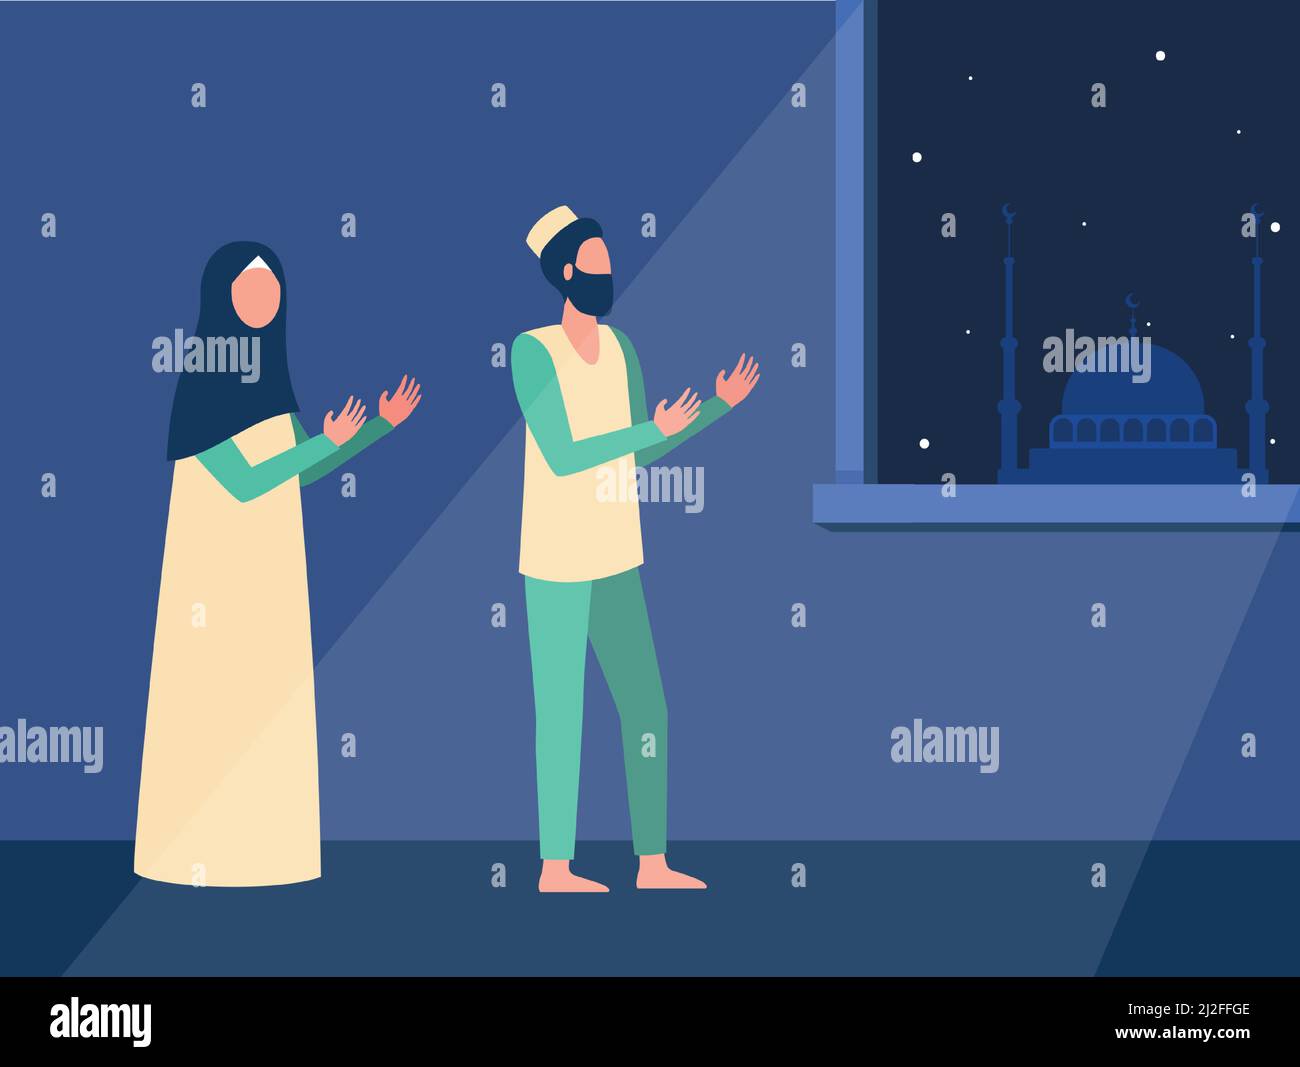 Muslim family praying at night together. Namaz, Islam, mosque flat vector illustration. Religion and faith concept for banner, website design or landi Stock Vector